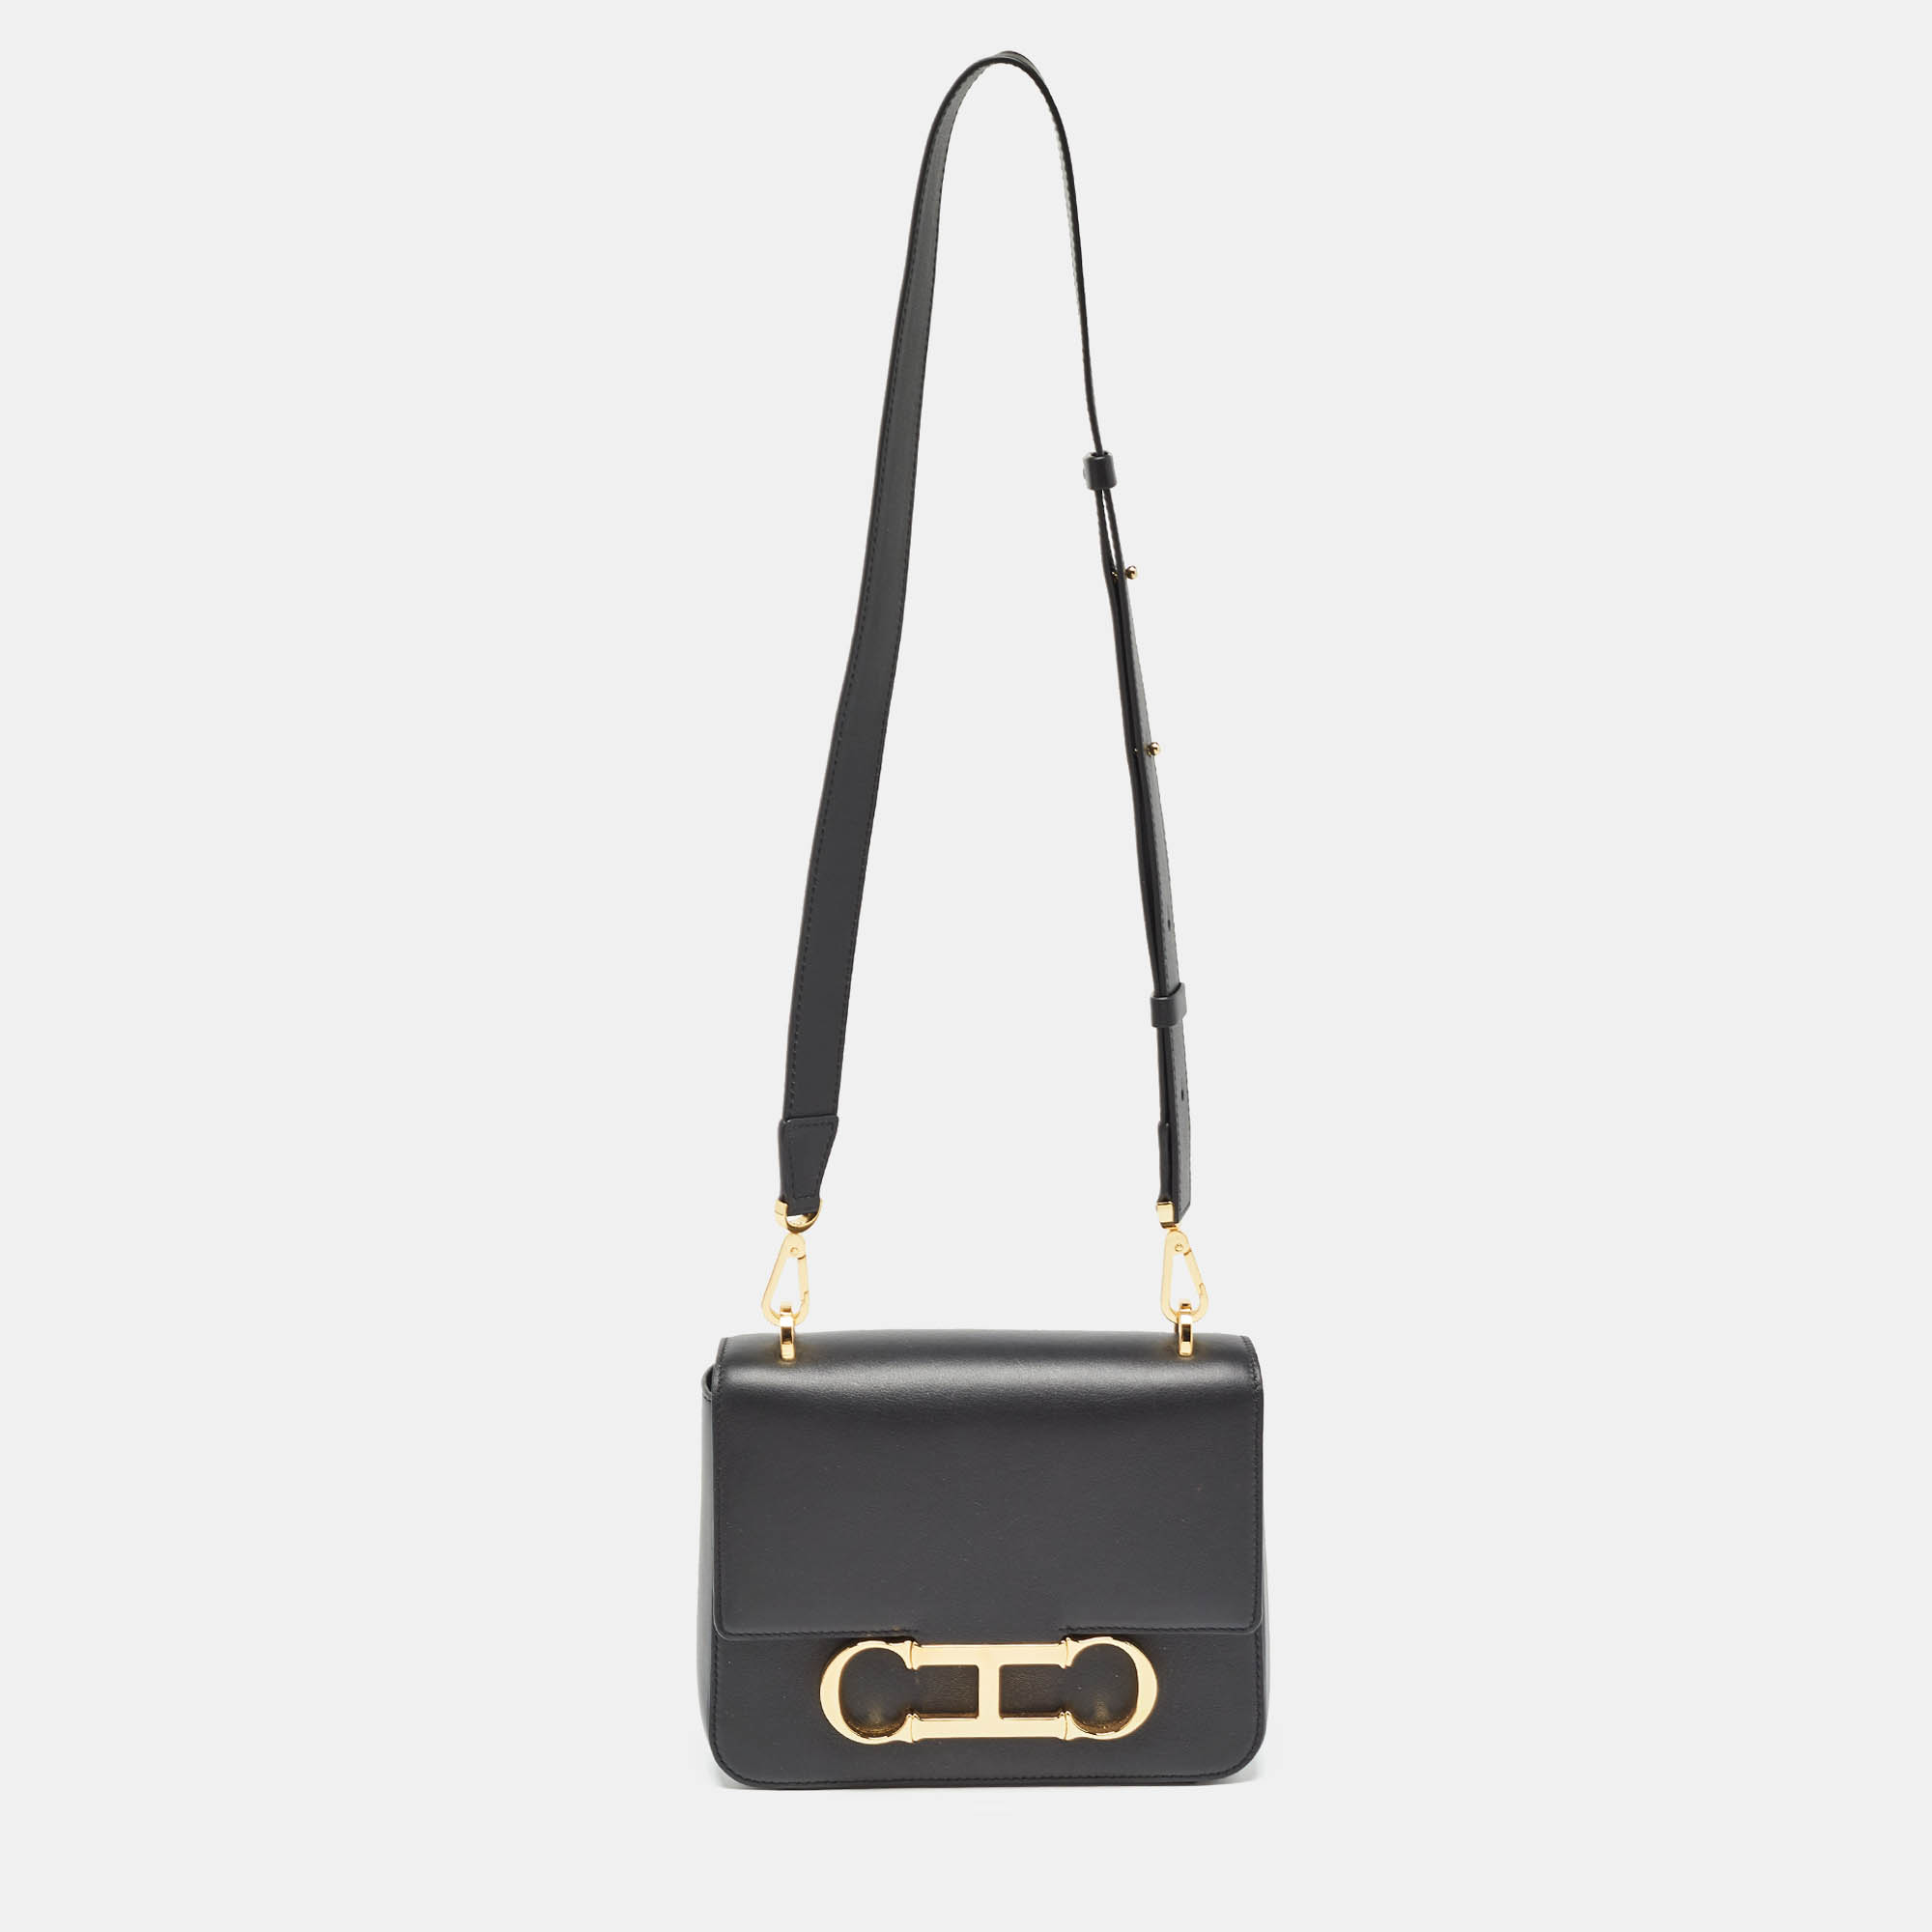 Structured sophisticated and stylish are some words that describe this shoulder bag Crafted from the best quality material the creation is adorned with the labels signature appeal and equipped with a well spaced interior. Carry it to parties or shopping sprees youll look chic